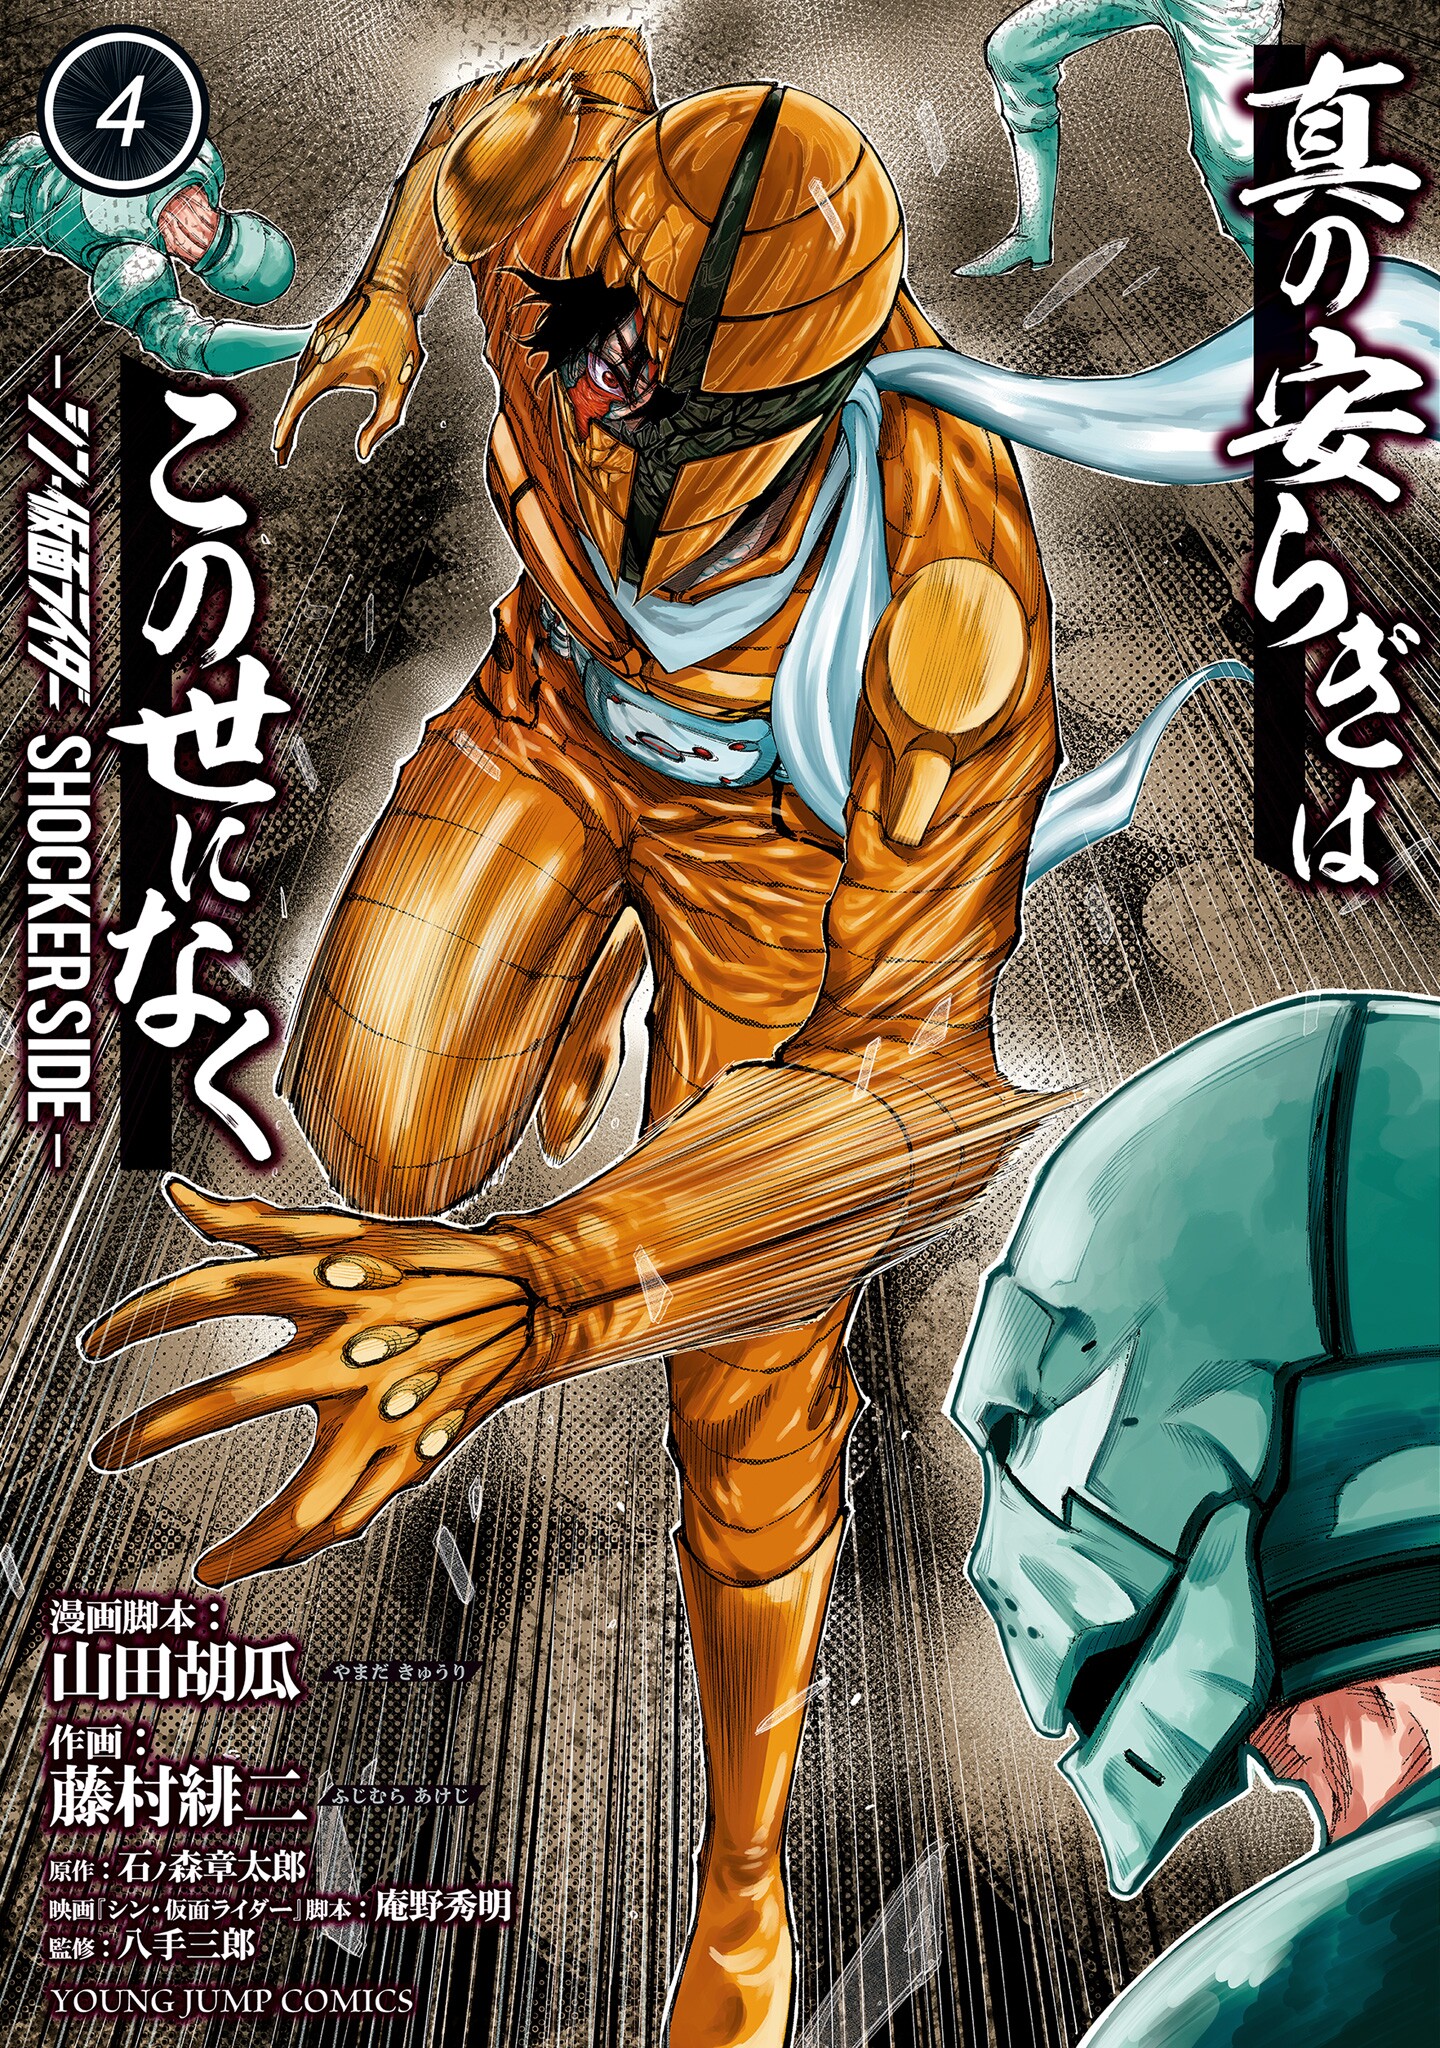 There Is No True Peace in This World -Shin Kamen Rider SHOCKER SIDE- -  MangaDex